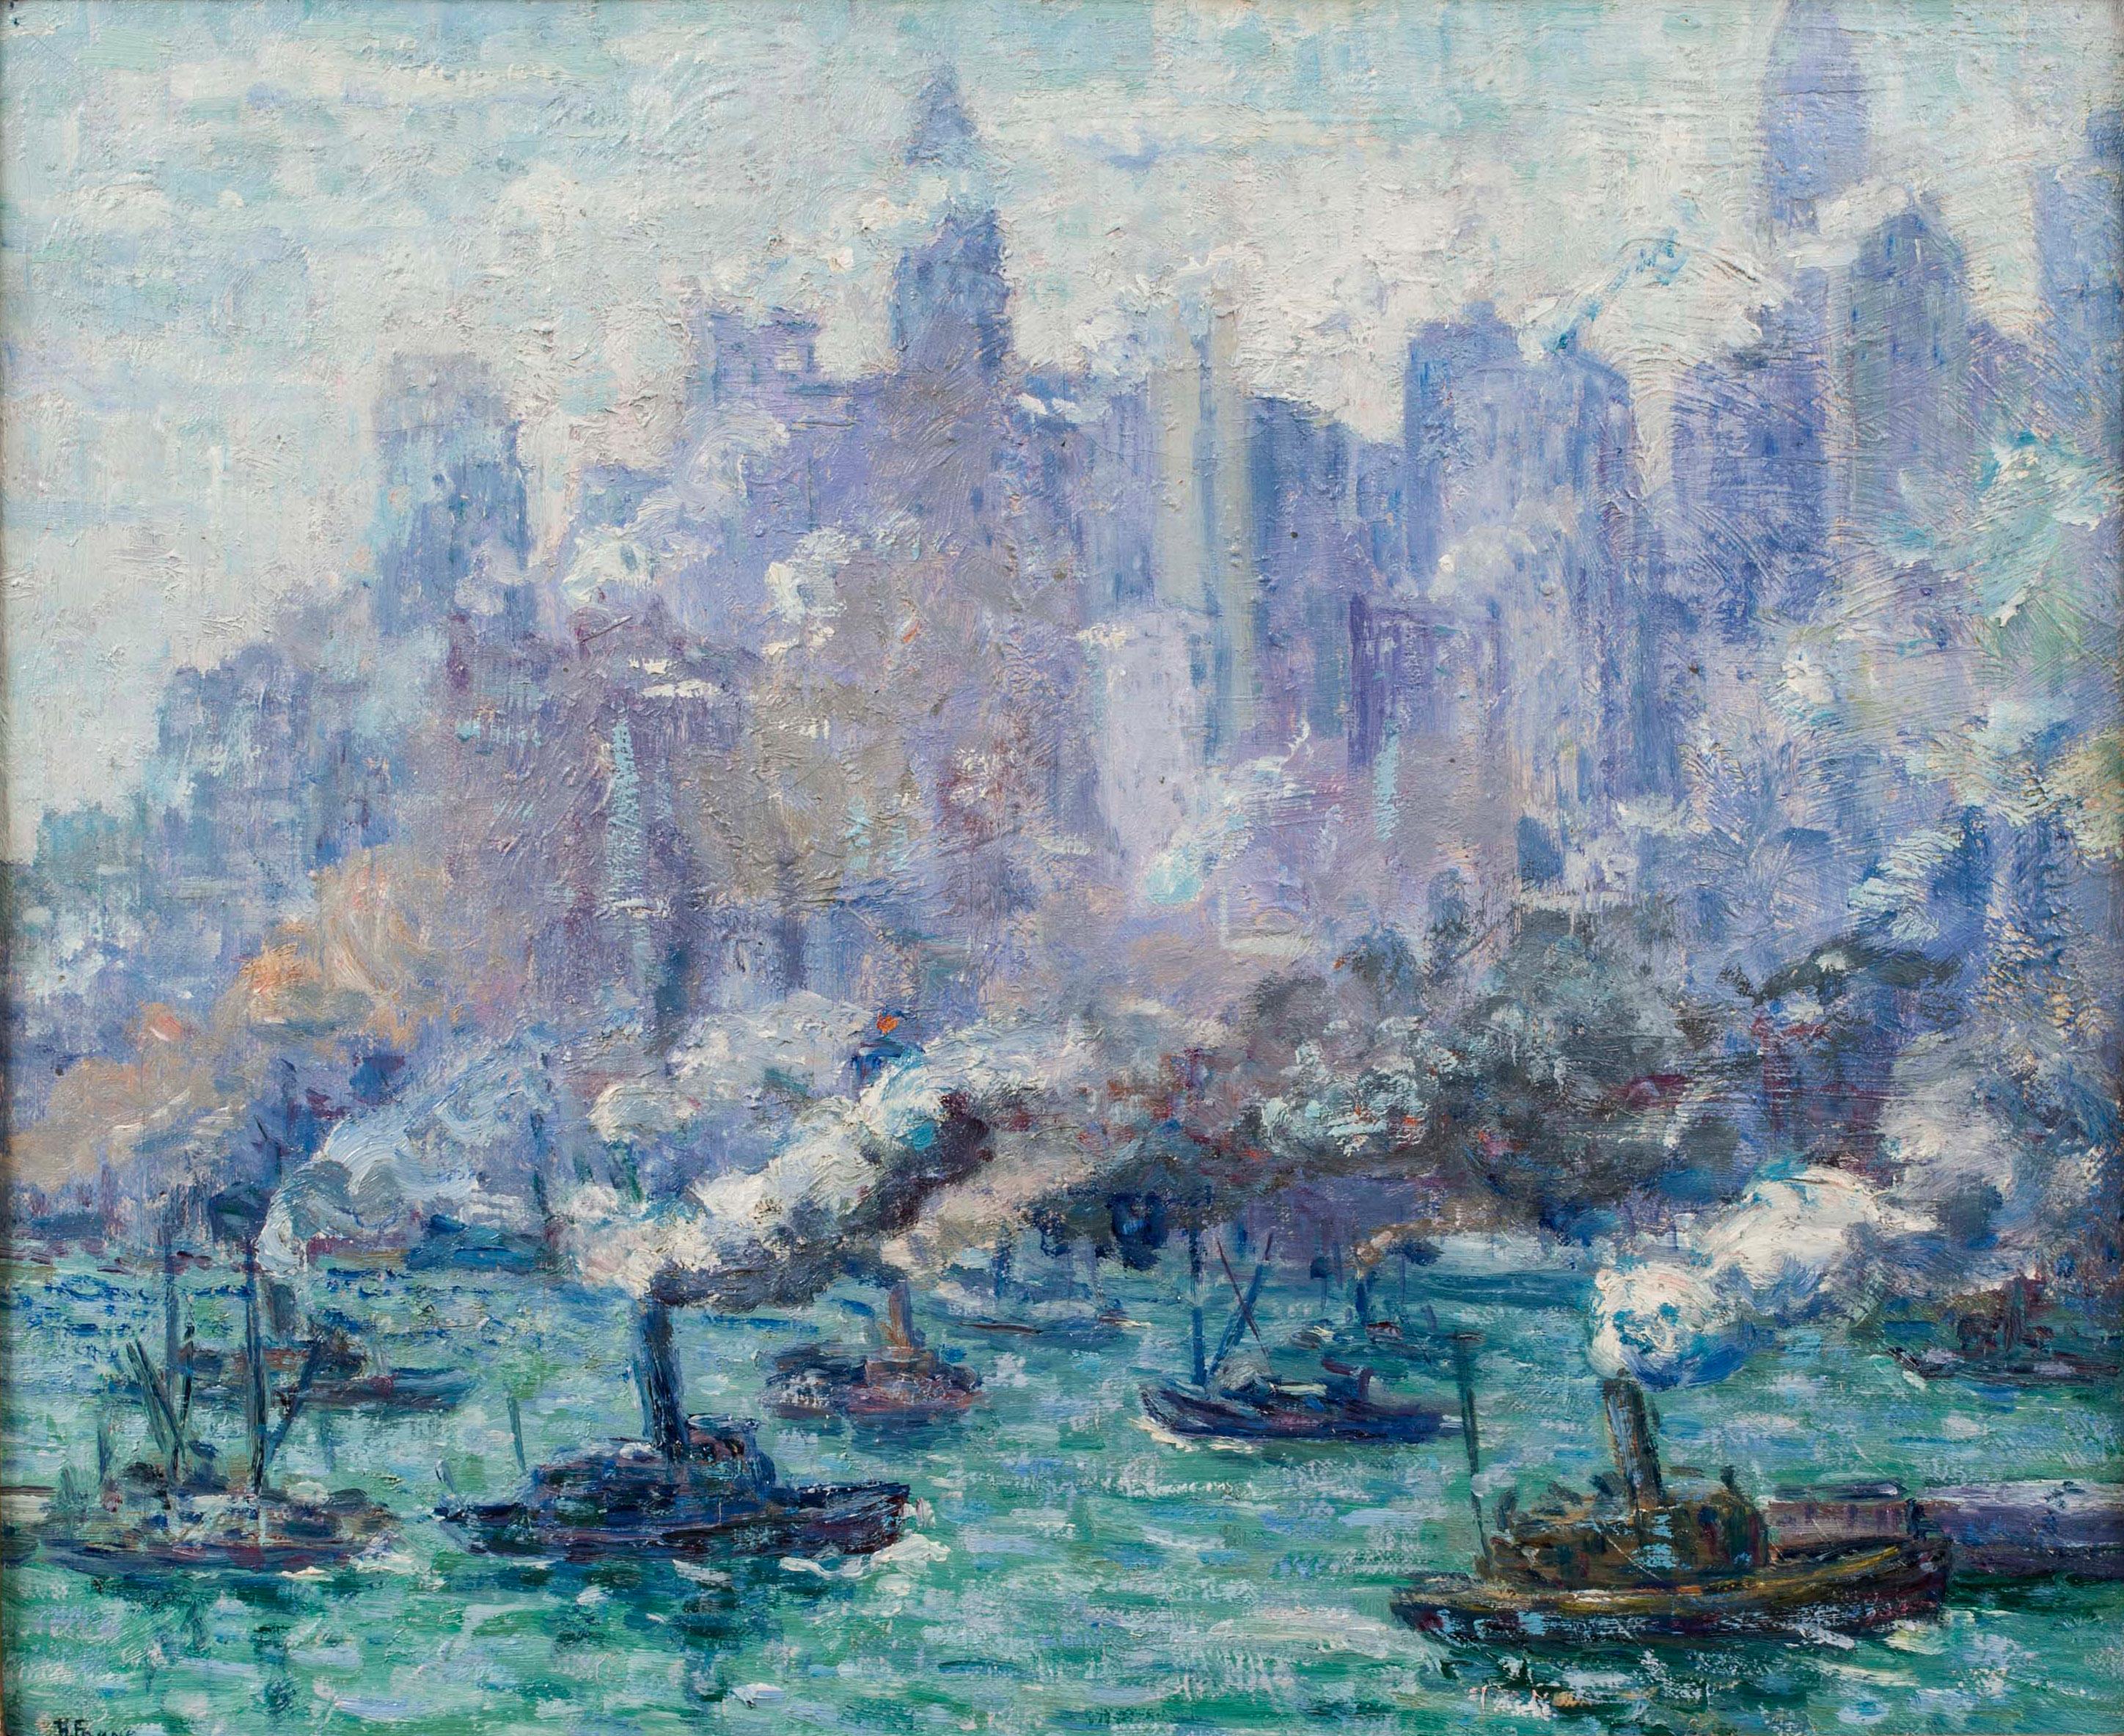 Activity: Lower Manhattan, New York City by Hortense Tanenbaum Ferne (1889-1976)

HORTENSE TANENBAUM FERNE (1889-1976)
Activity: Lower Manhattan, New York City, c. 1935 {from Brooklyn Bridge Park}
Oil on canvas
18 x 23 inches
Signed lower